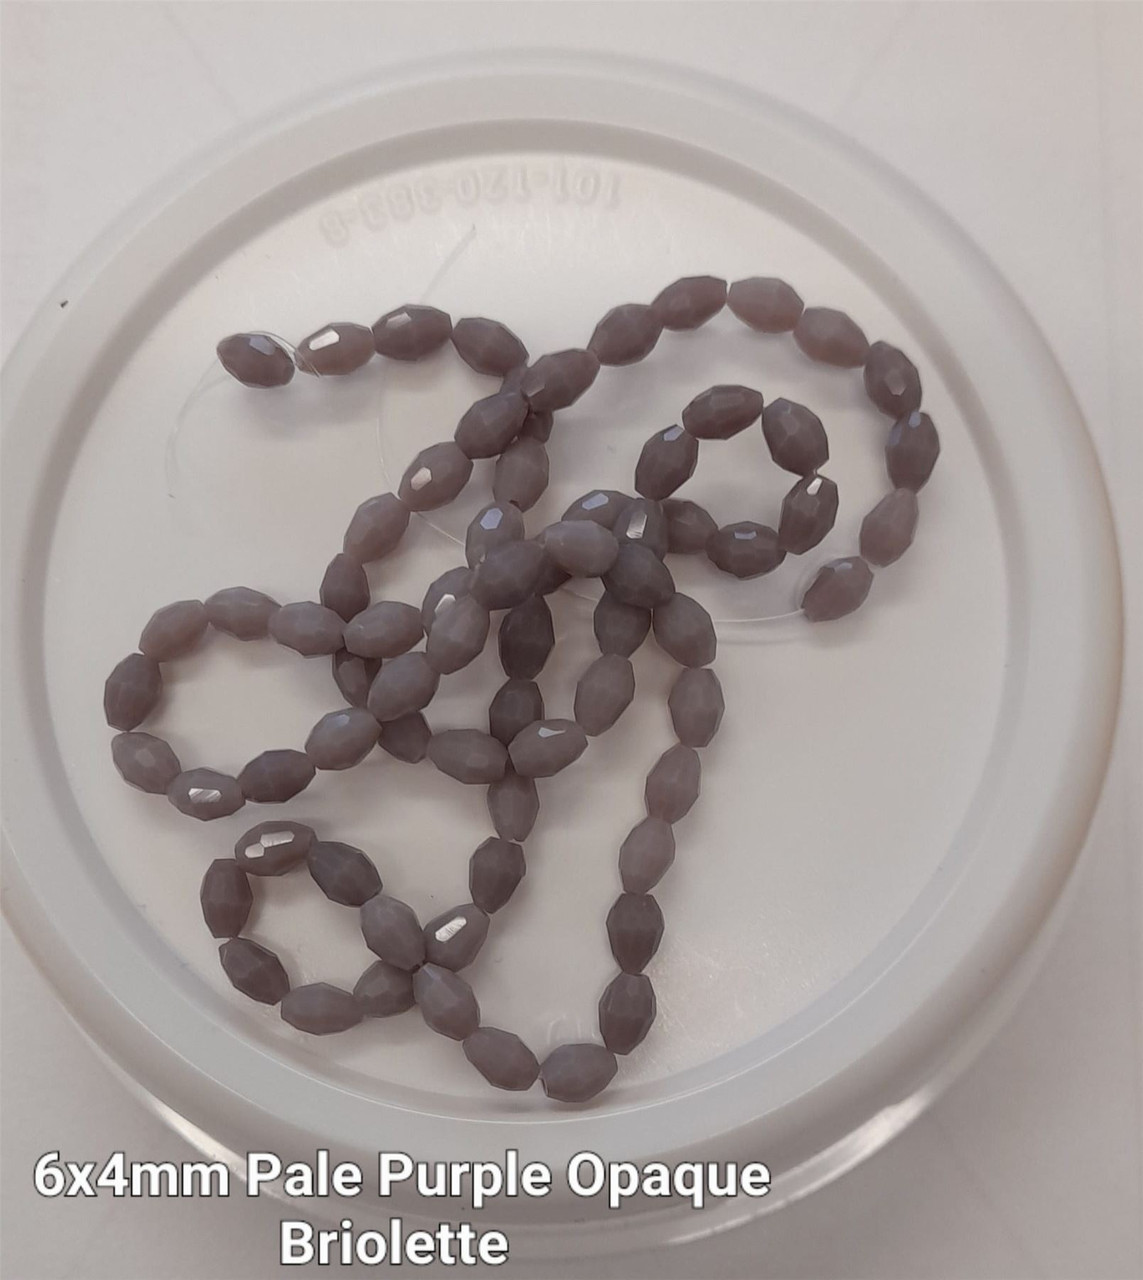 Strand of faceted drop glass beads (briolettes) - approx 6x4mm, Pale Purple Opaque, approx 72 beads